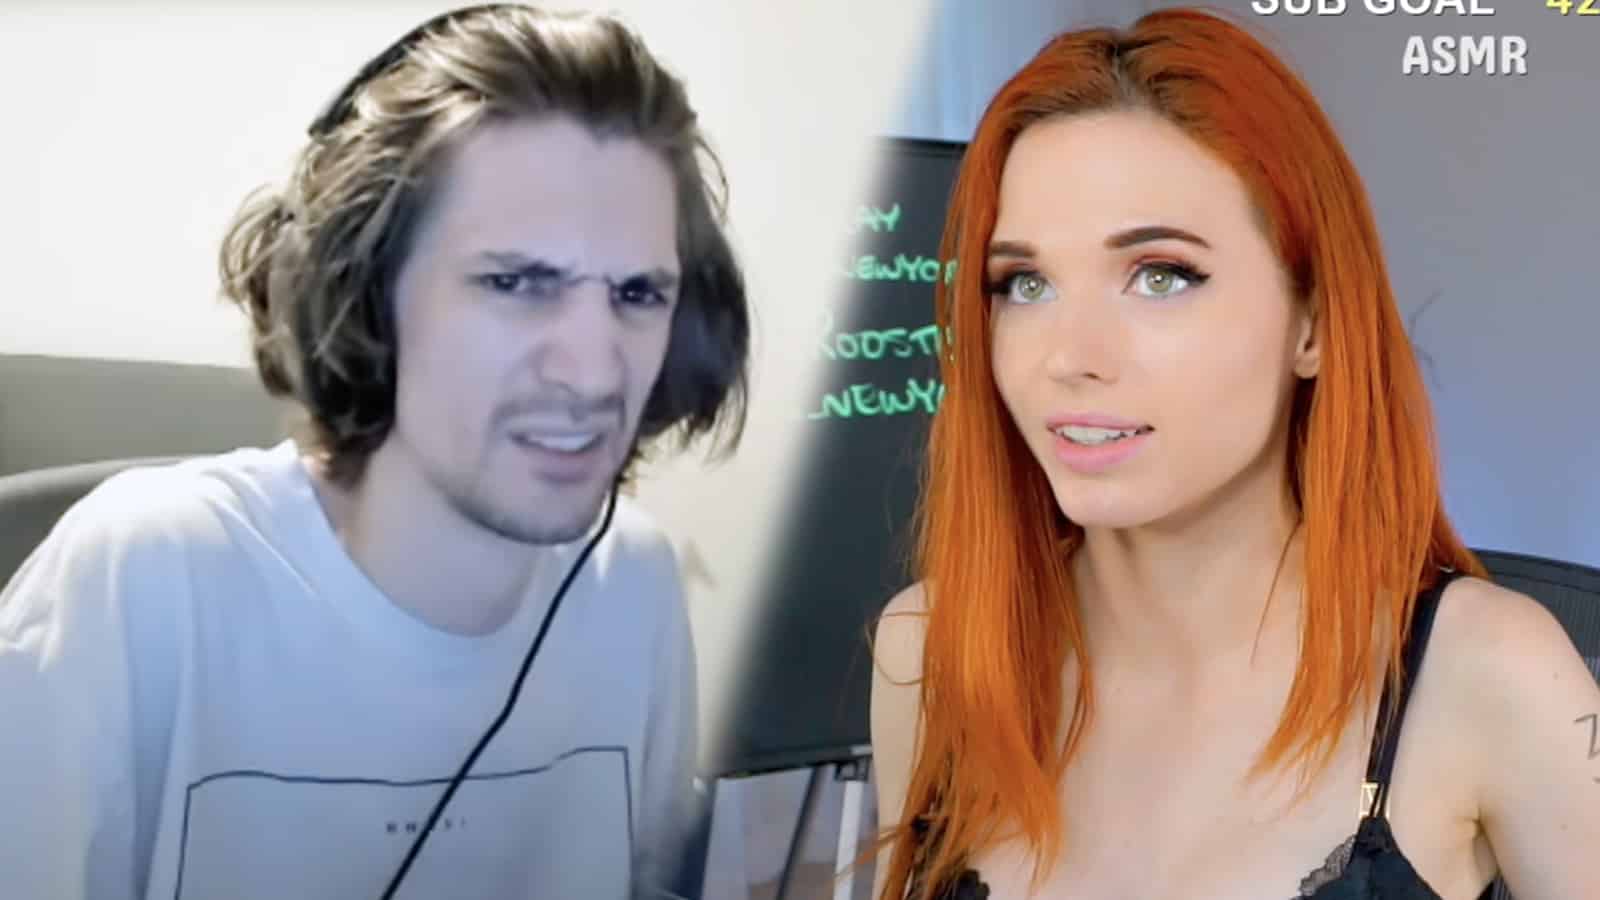 Twitch streamers xQc and Amouranth side-by-side